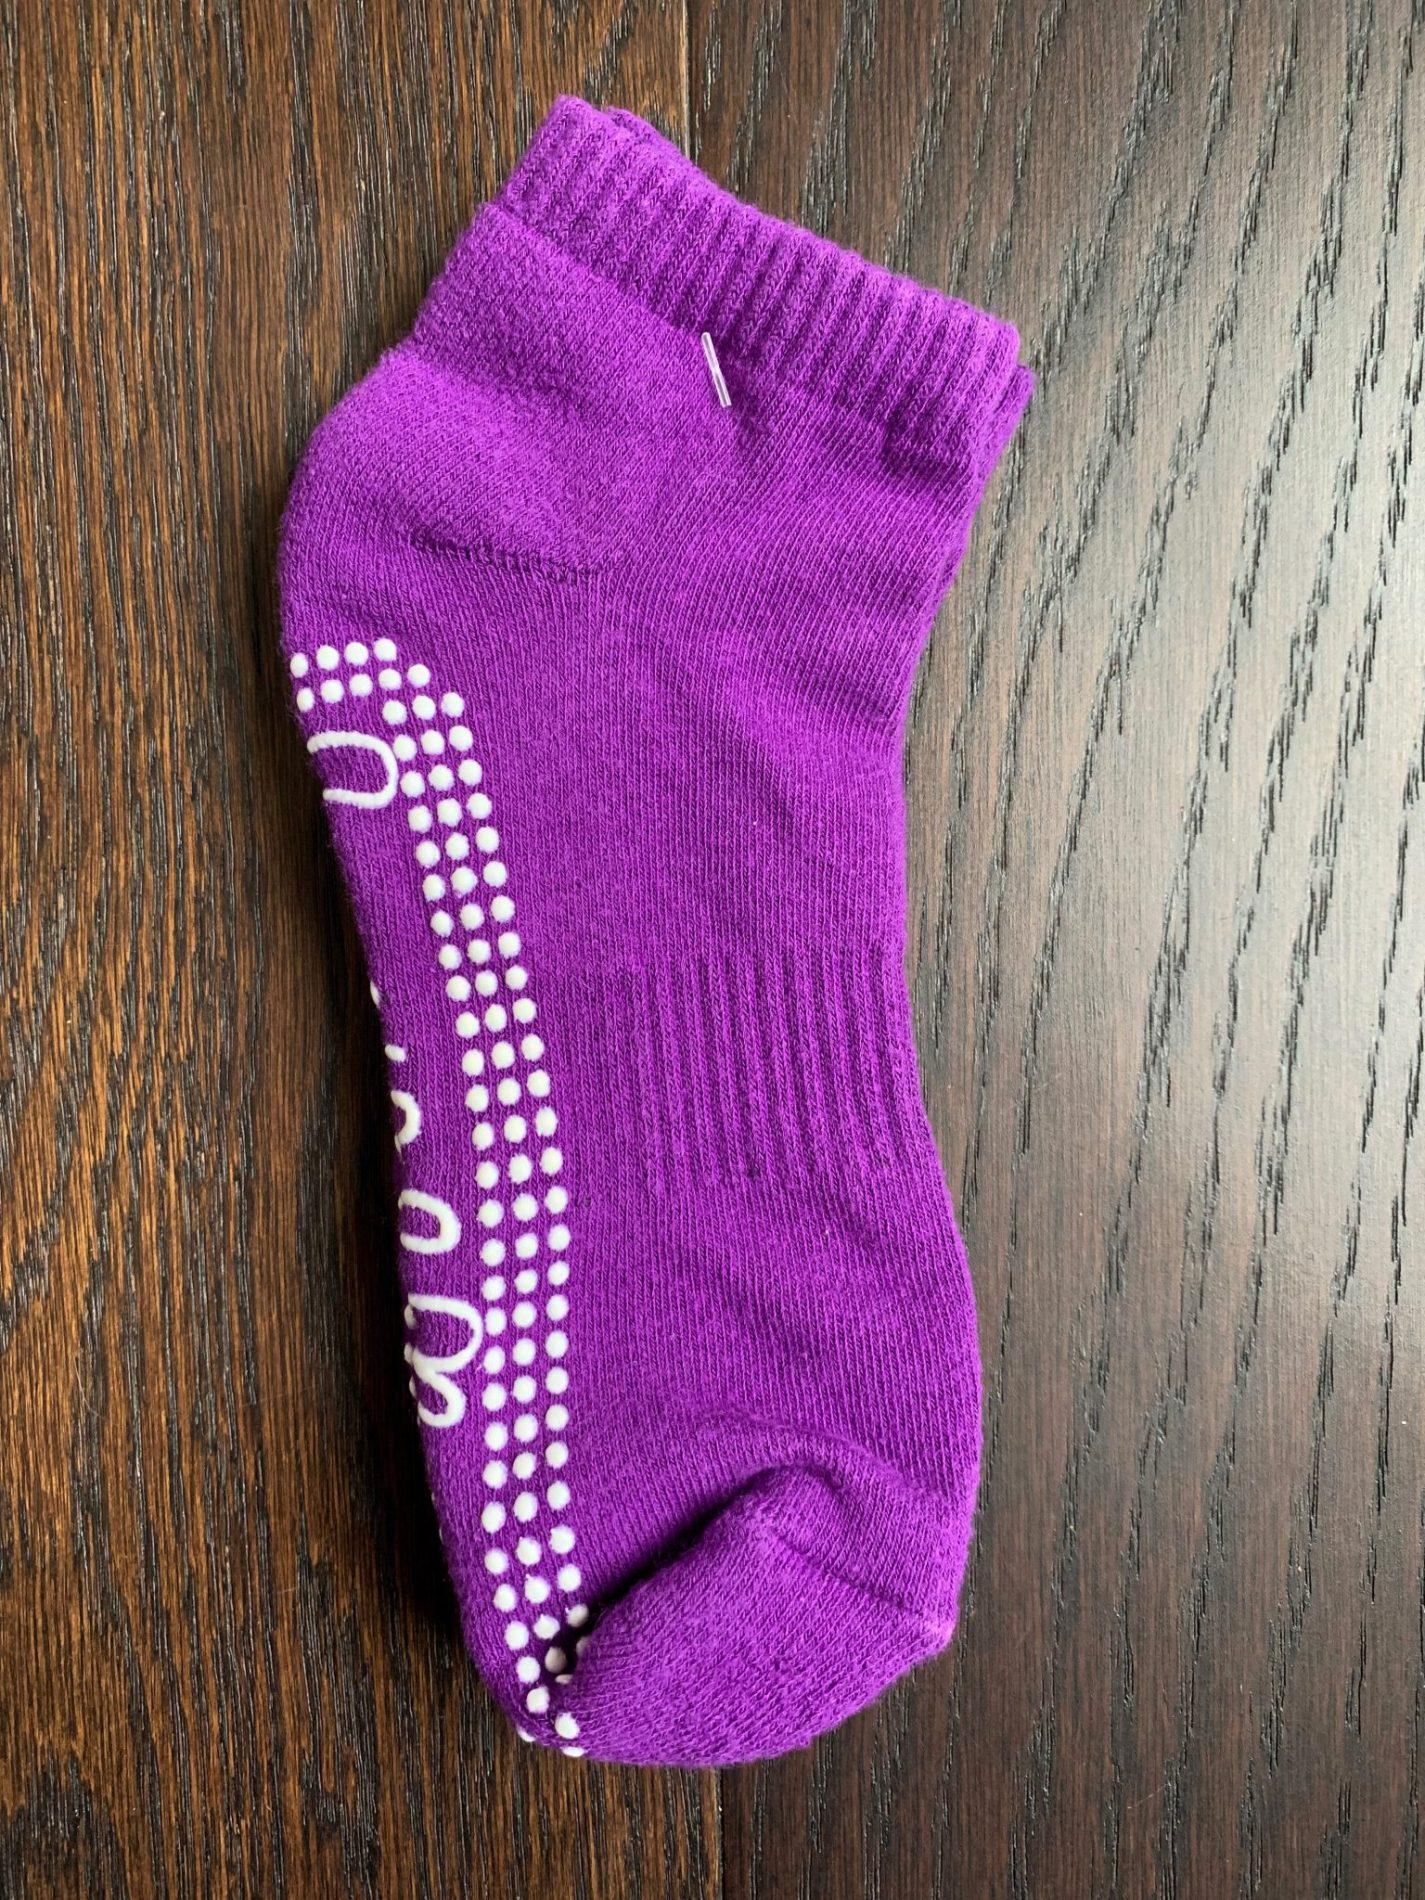 Life By Lexie Mystery Sticky Socks Review - Subscription Box Ramblings